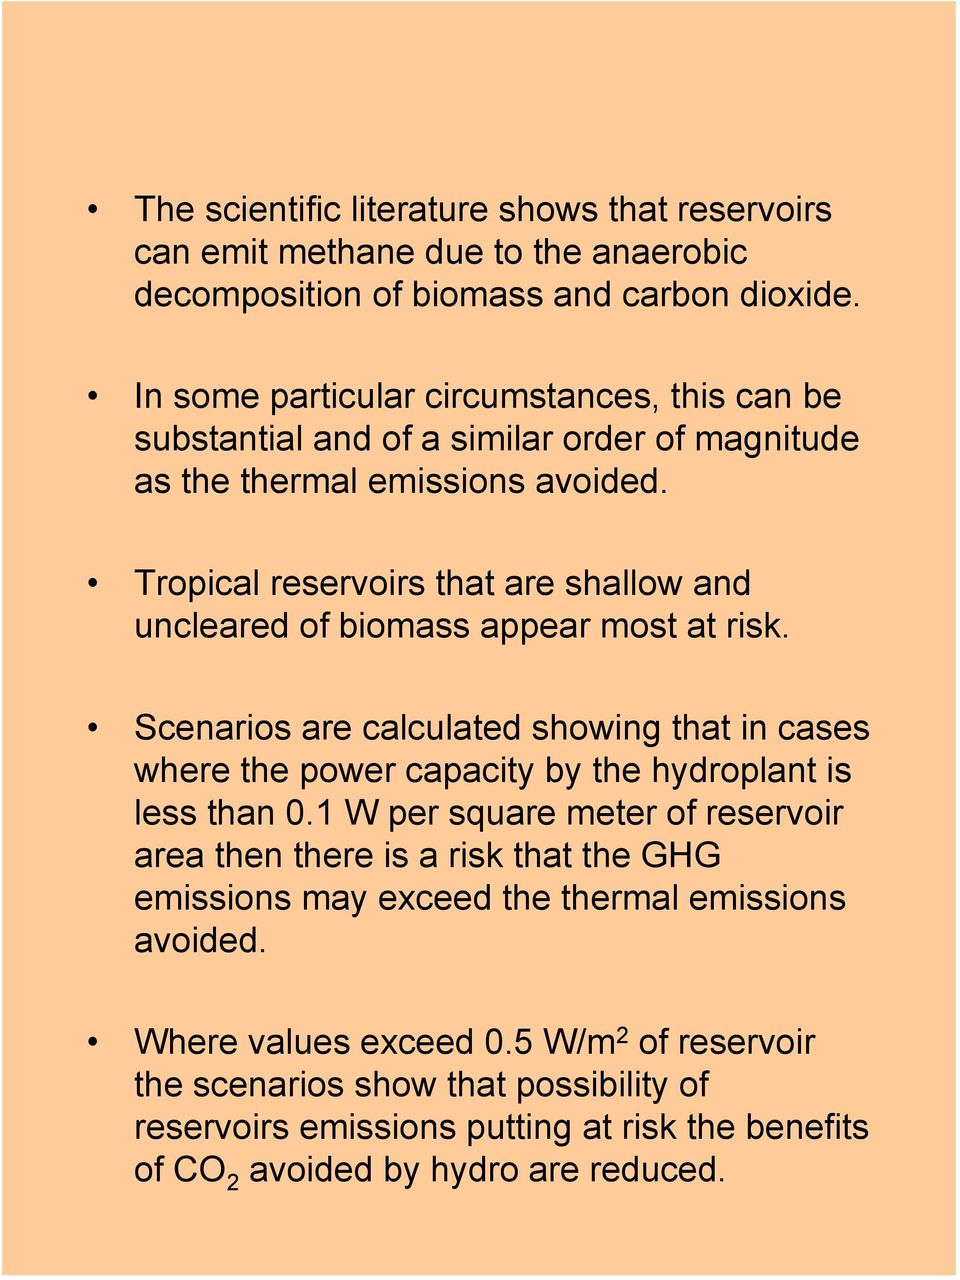 Tropical reservoirs that are shallow and uncleared of biomass appear most at risk.